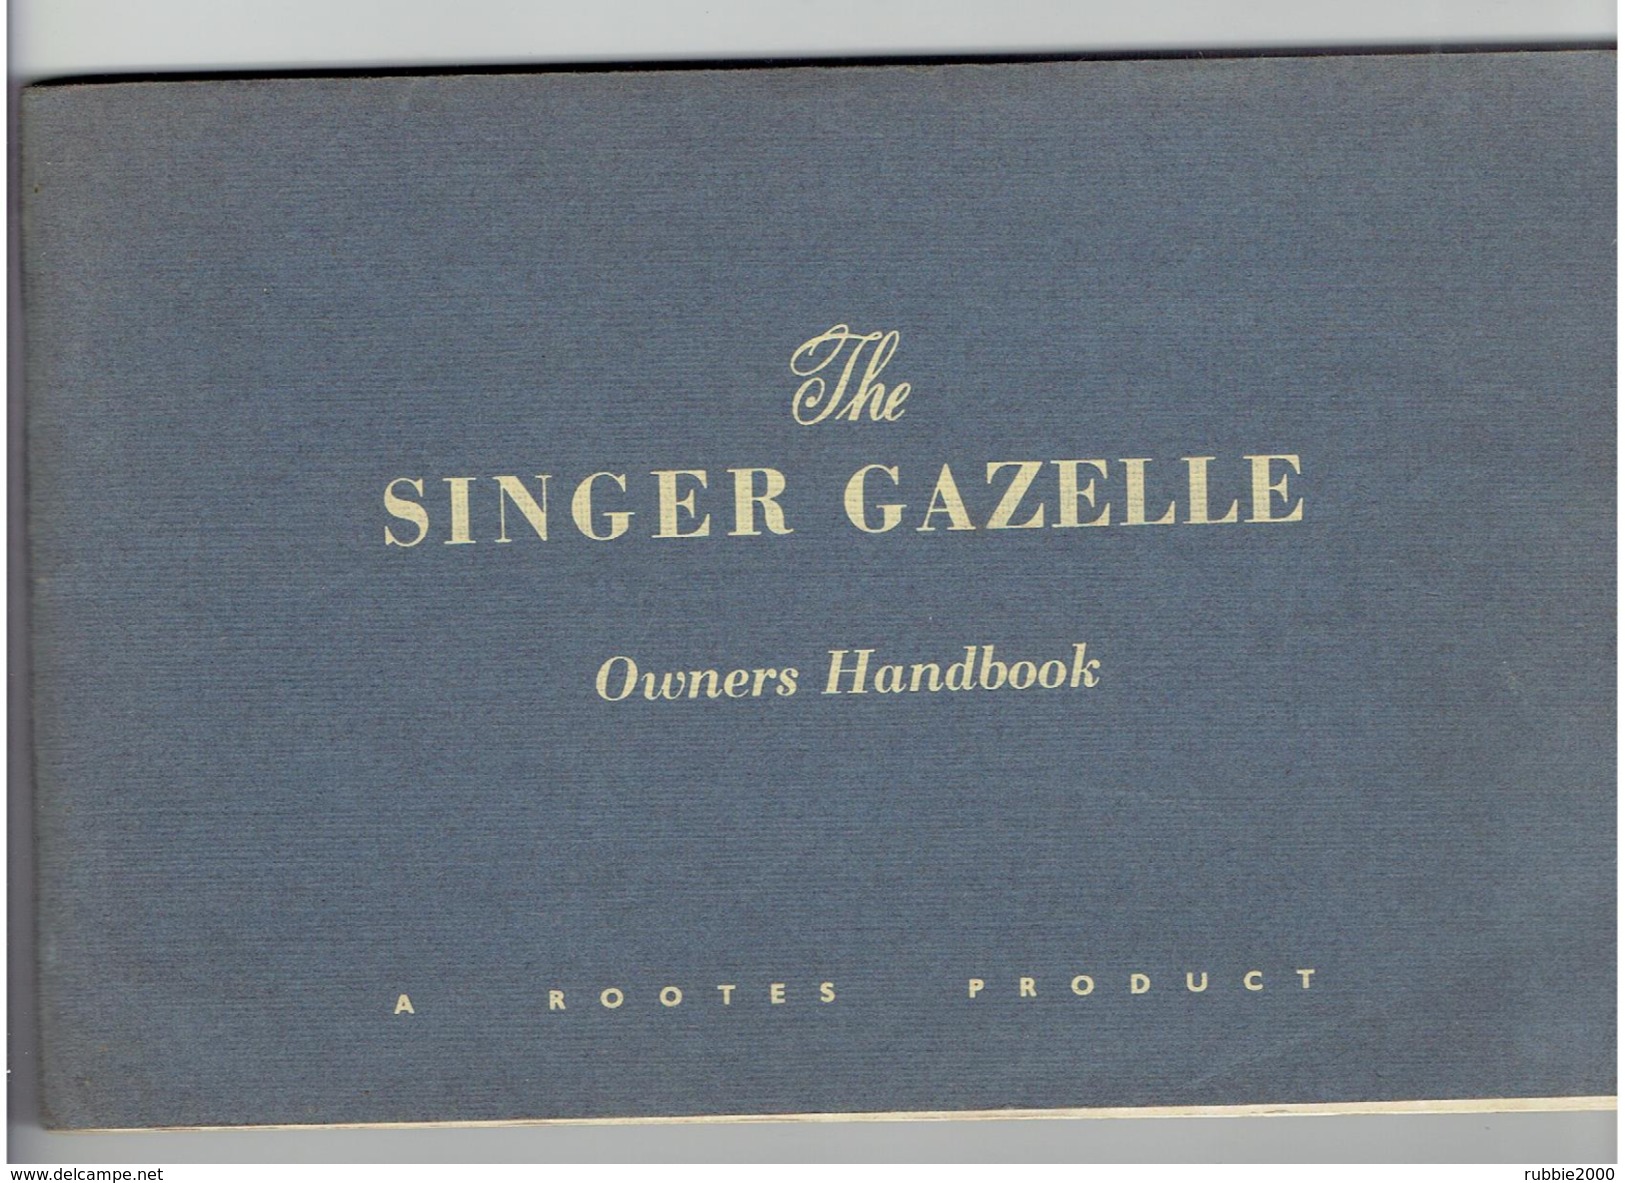 THE SINGER GAZELLE OWNERS HANDBOOK ISSUED 1958 SINGER MOTORS LIMITED COVENTRY ENGLAND A ROOTES PRODUCT - Transports